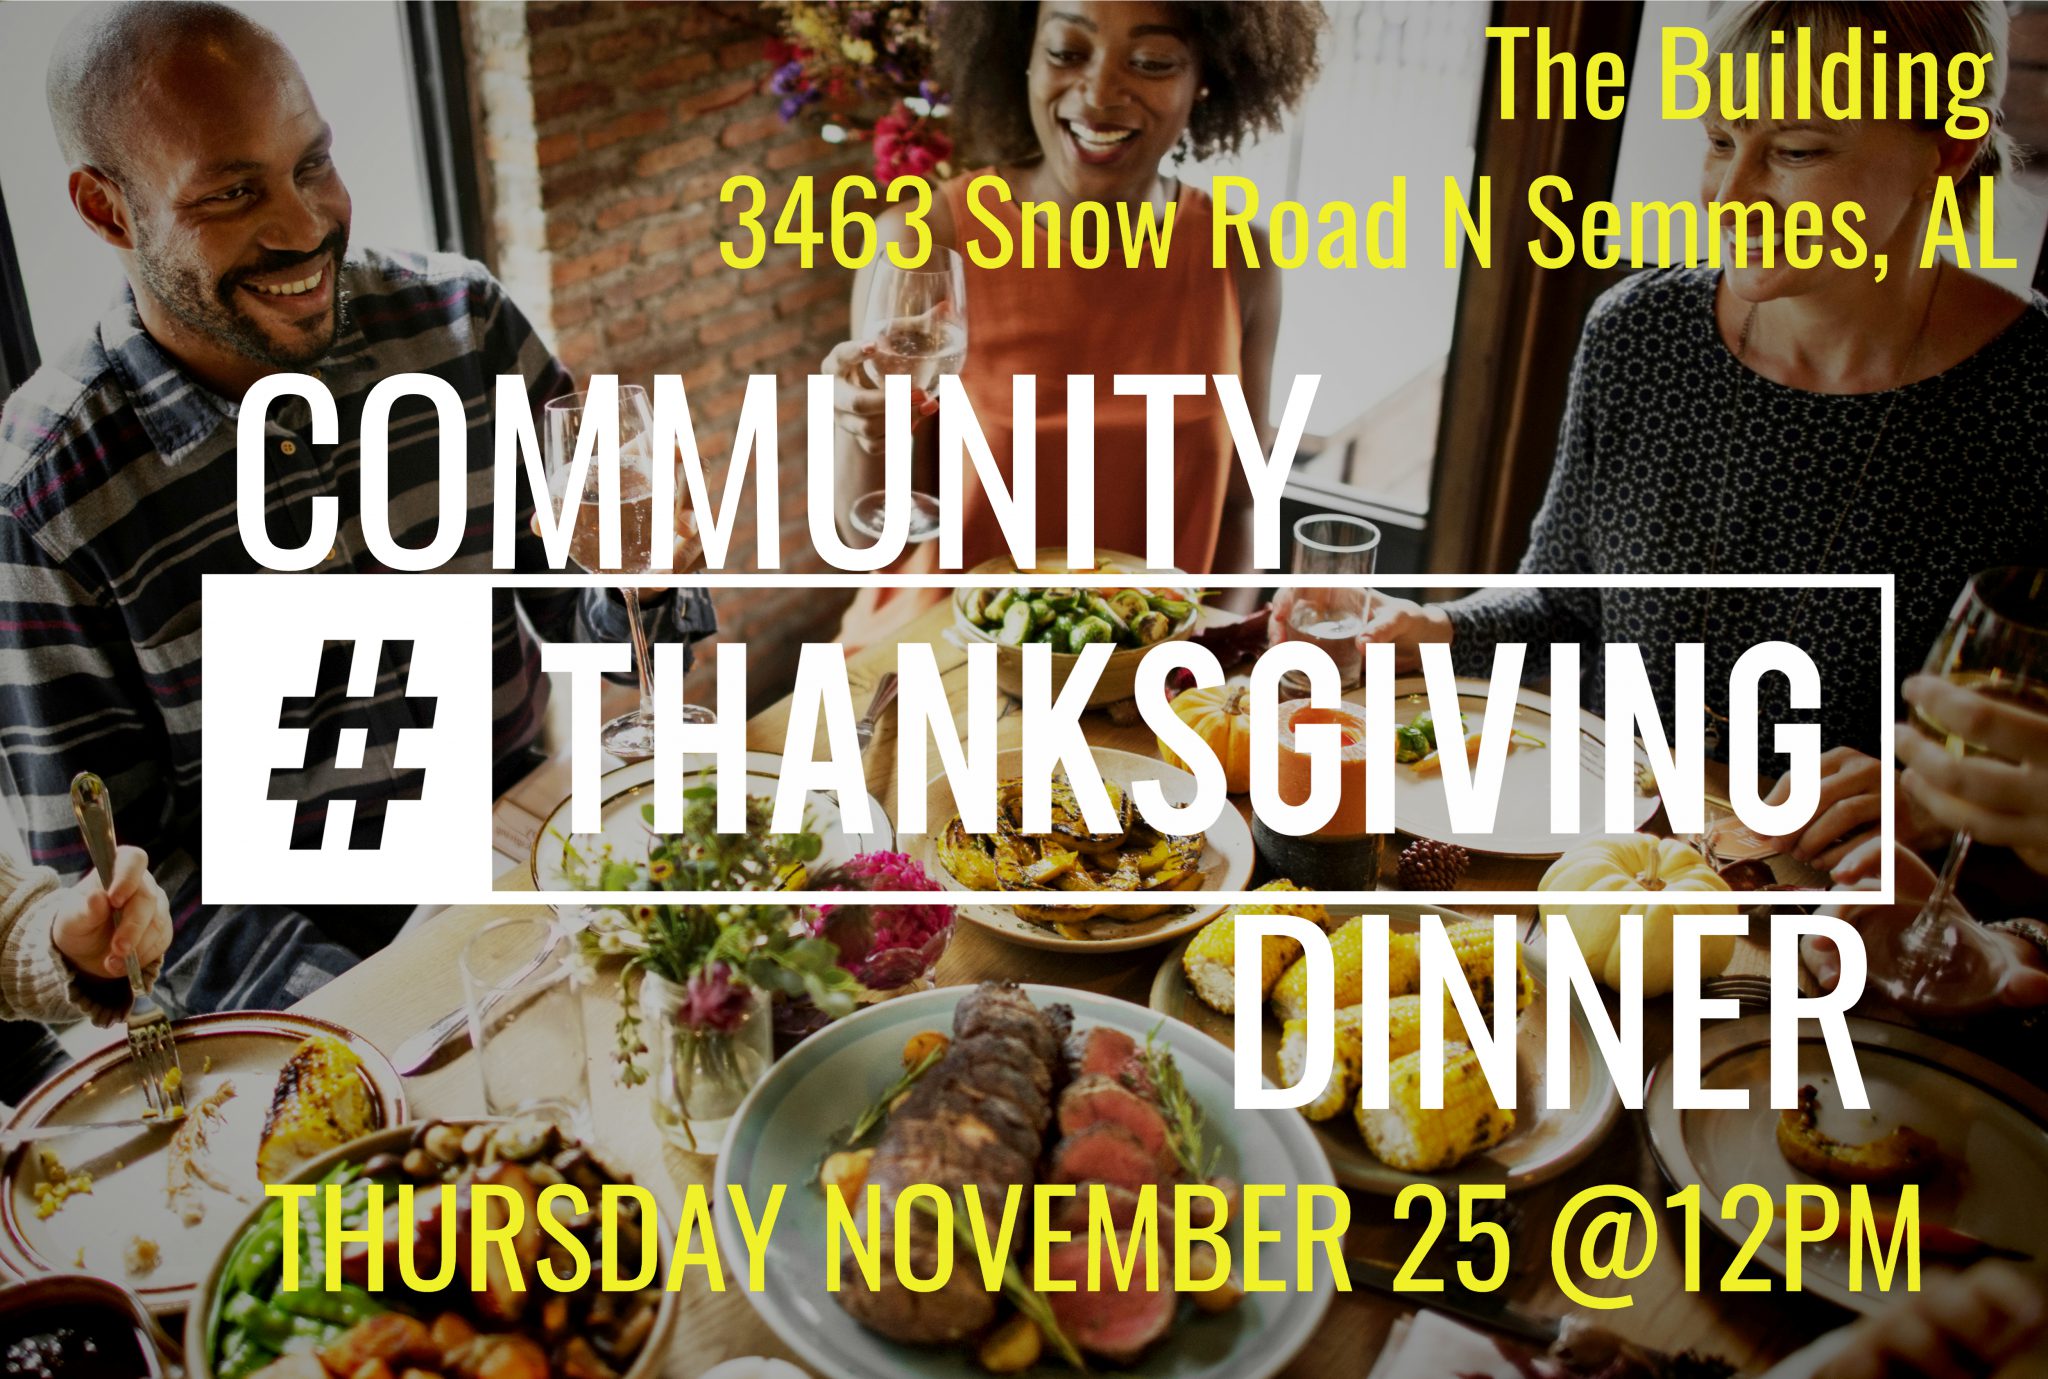 Community Thanksgiving Dinner by The Building City of Semmes, Alabama